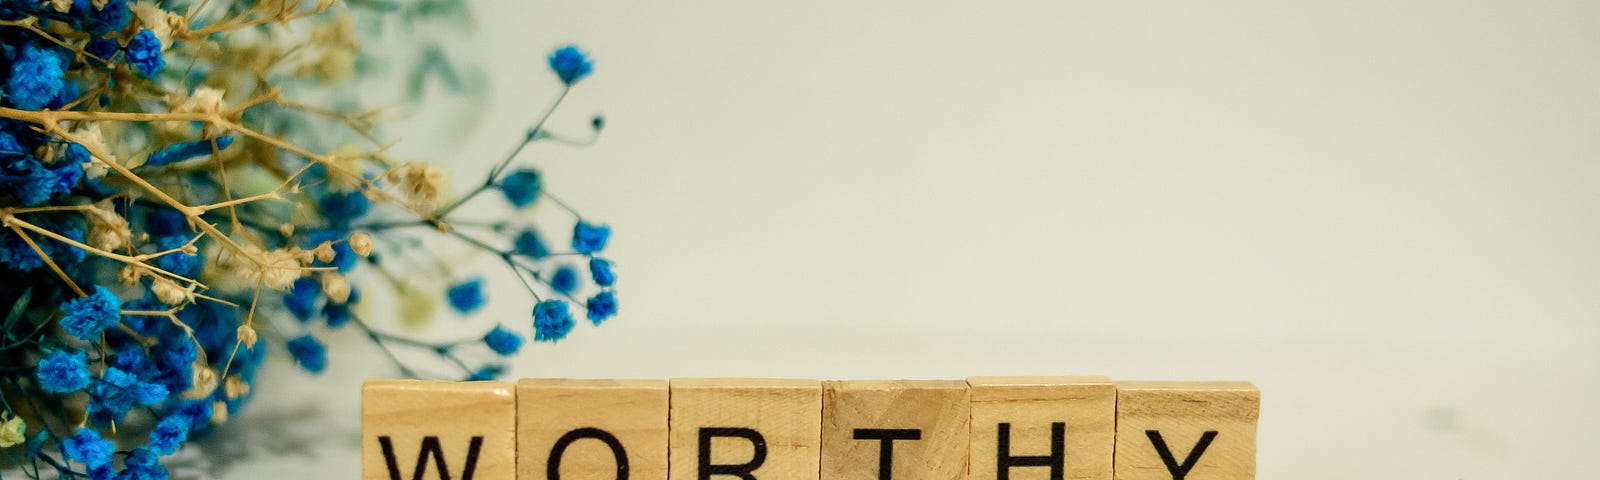 ‘Worthy’ spelled out in scrabble tiles, with some flowers in the background, because why not?